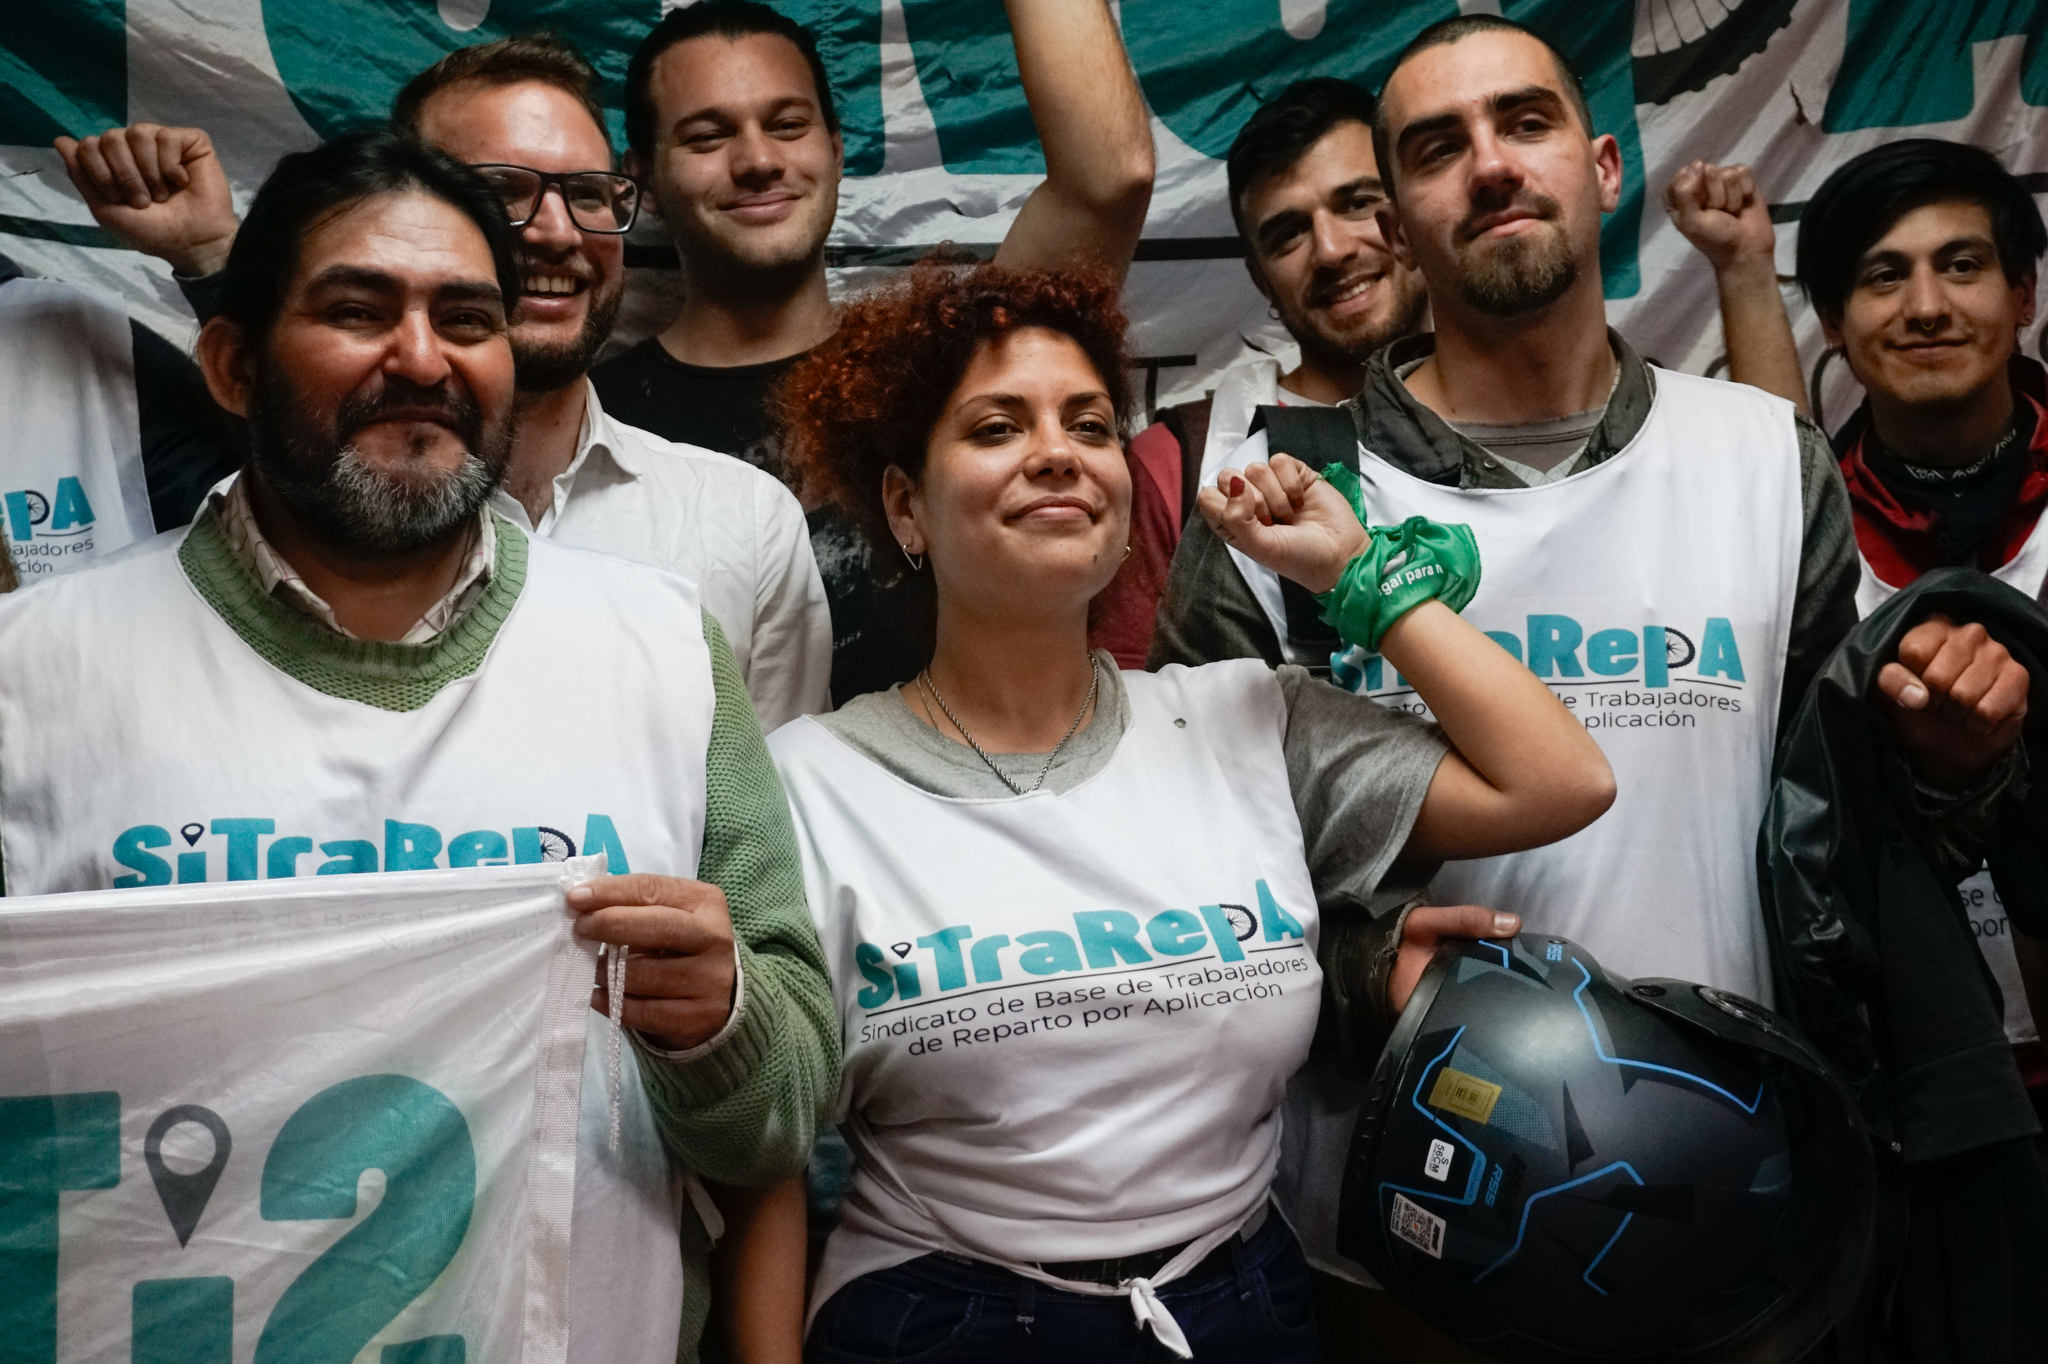 Sick of Unfair Labor Practices, a Delivery Worker in Argentina Organizes for Reform